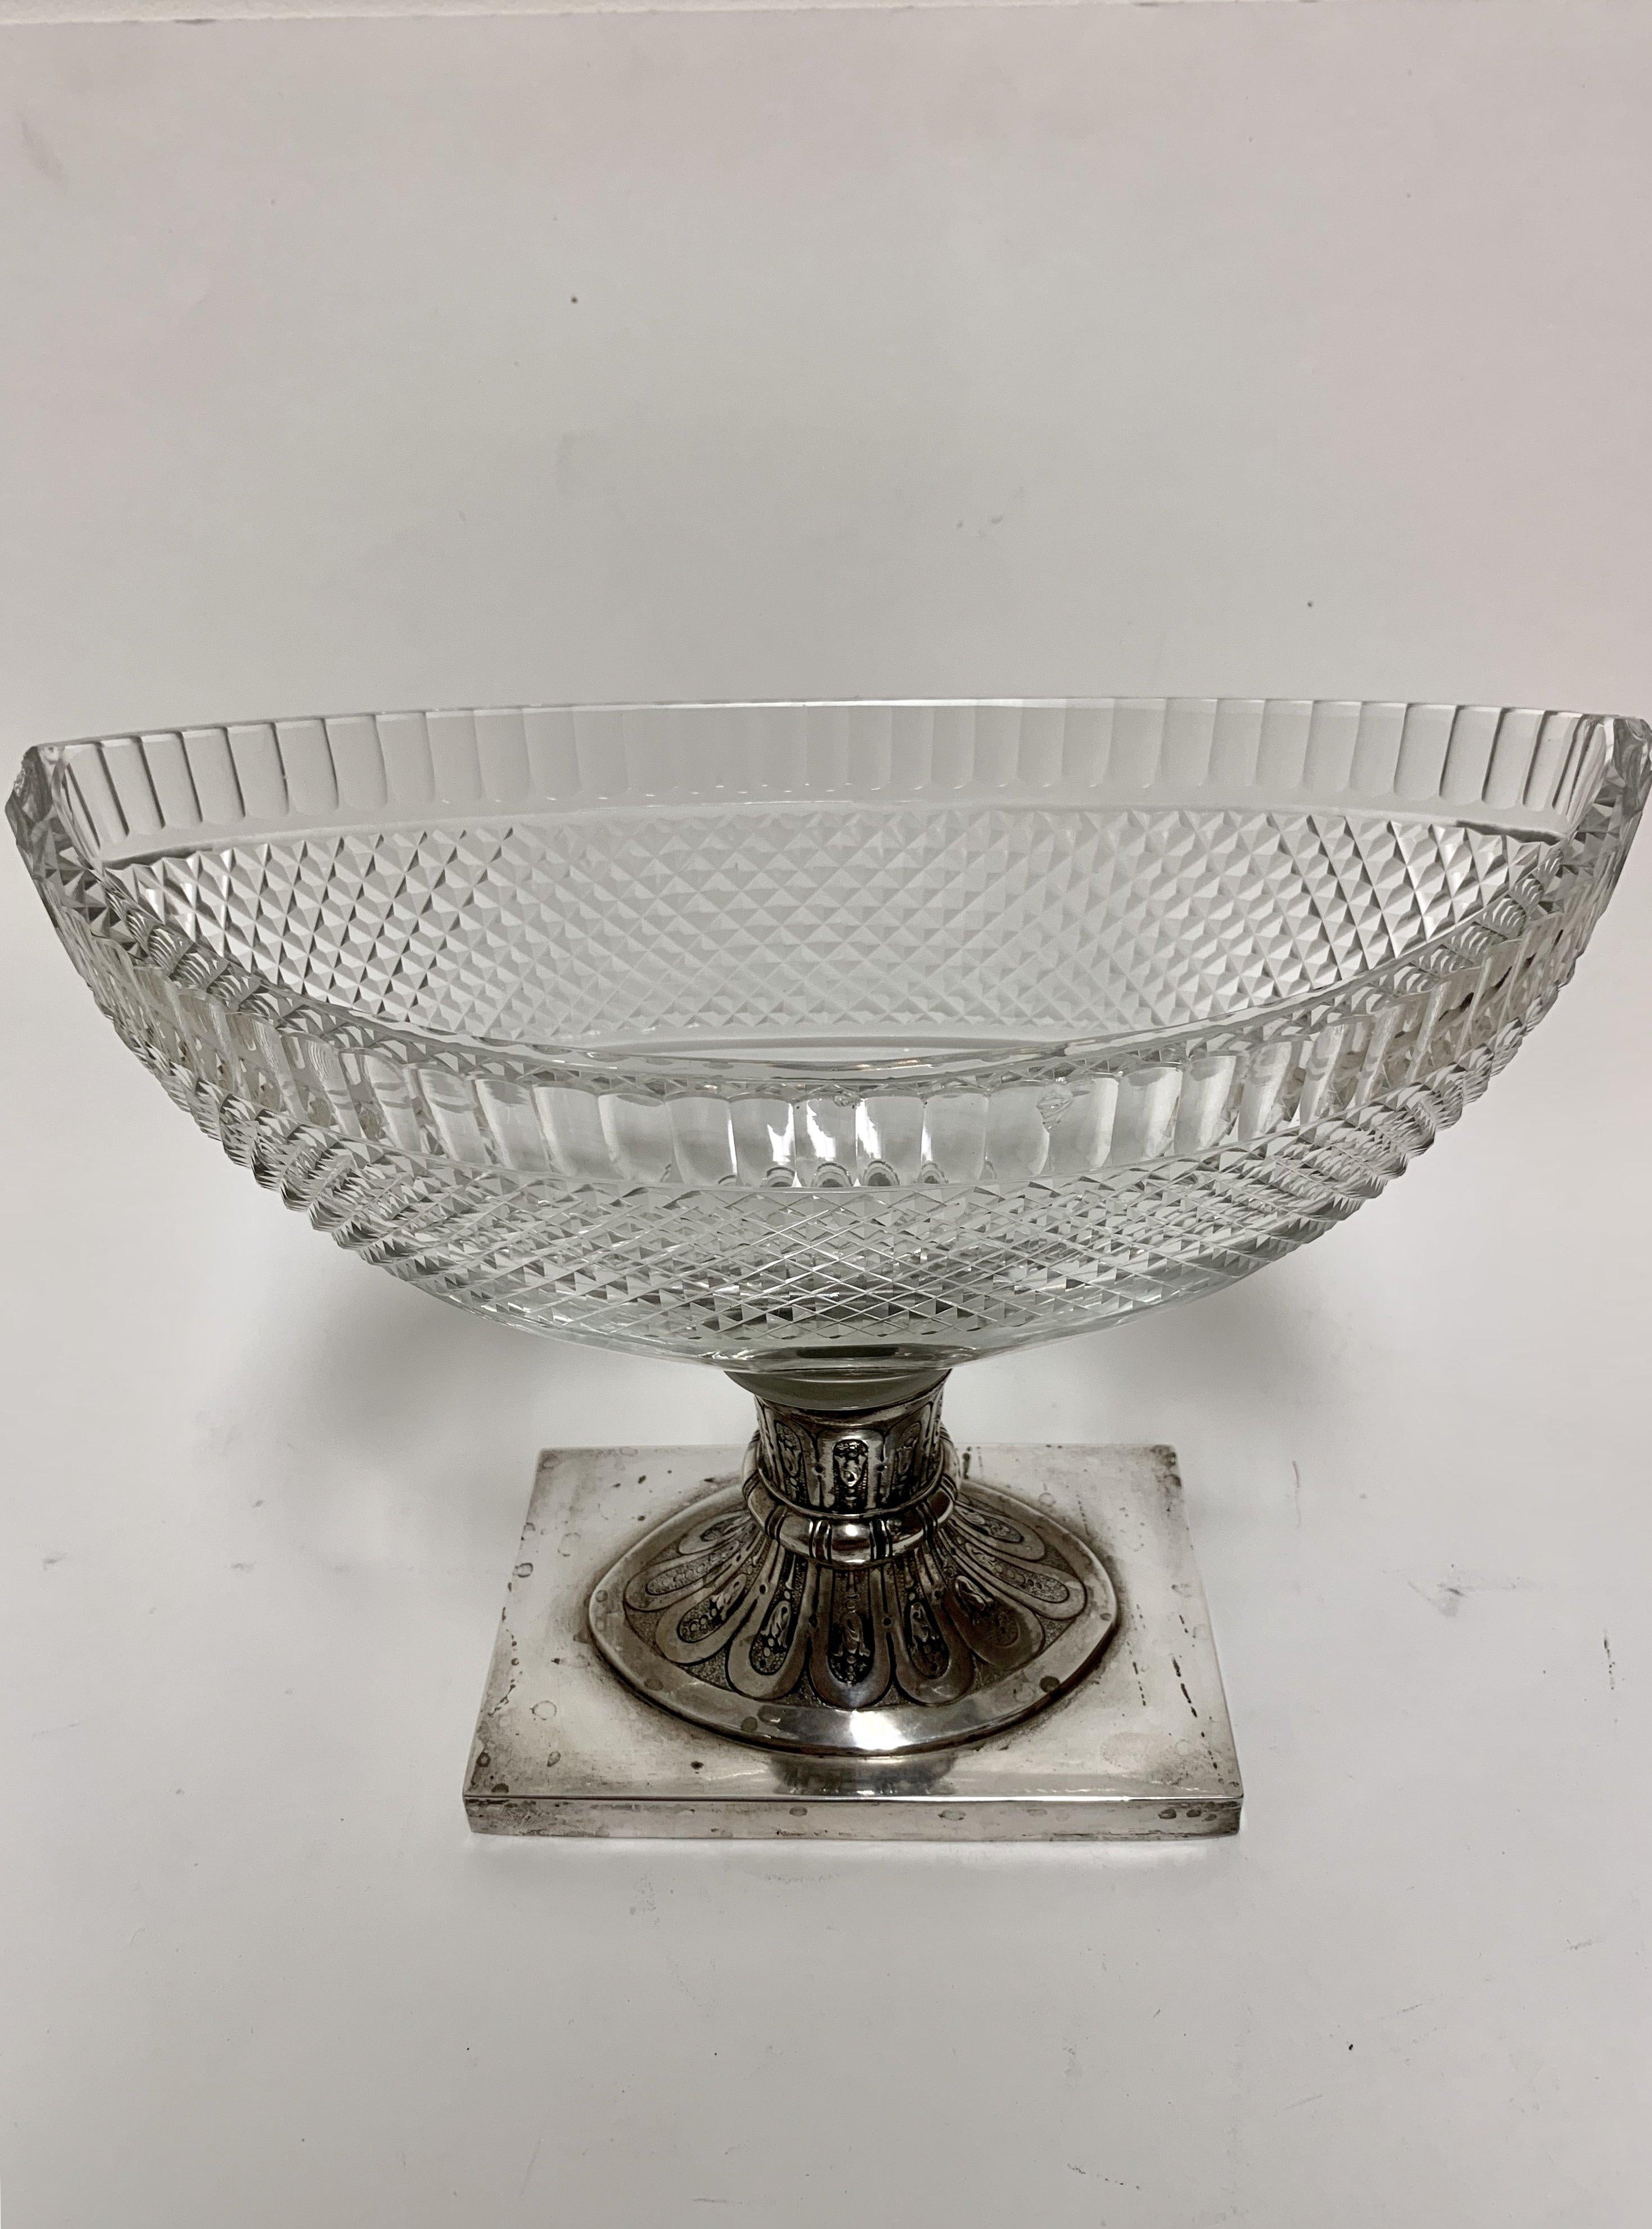 Beautiful pair of cut glass compote bowls on silver pedestal. Brilliant cut glass bowl mounted on a German continental silver pedestal decorated with floral designs. Measuring 9 1/2” in height by 11 1/2” in width by 6 1/2” in depth. Some minor chips